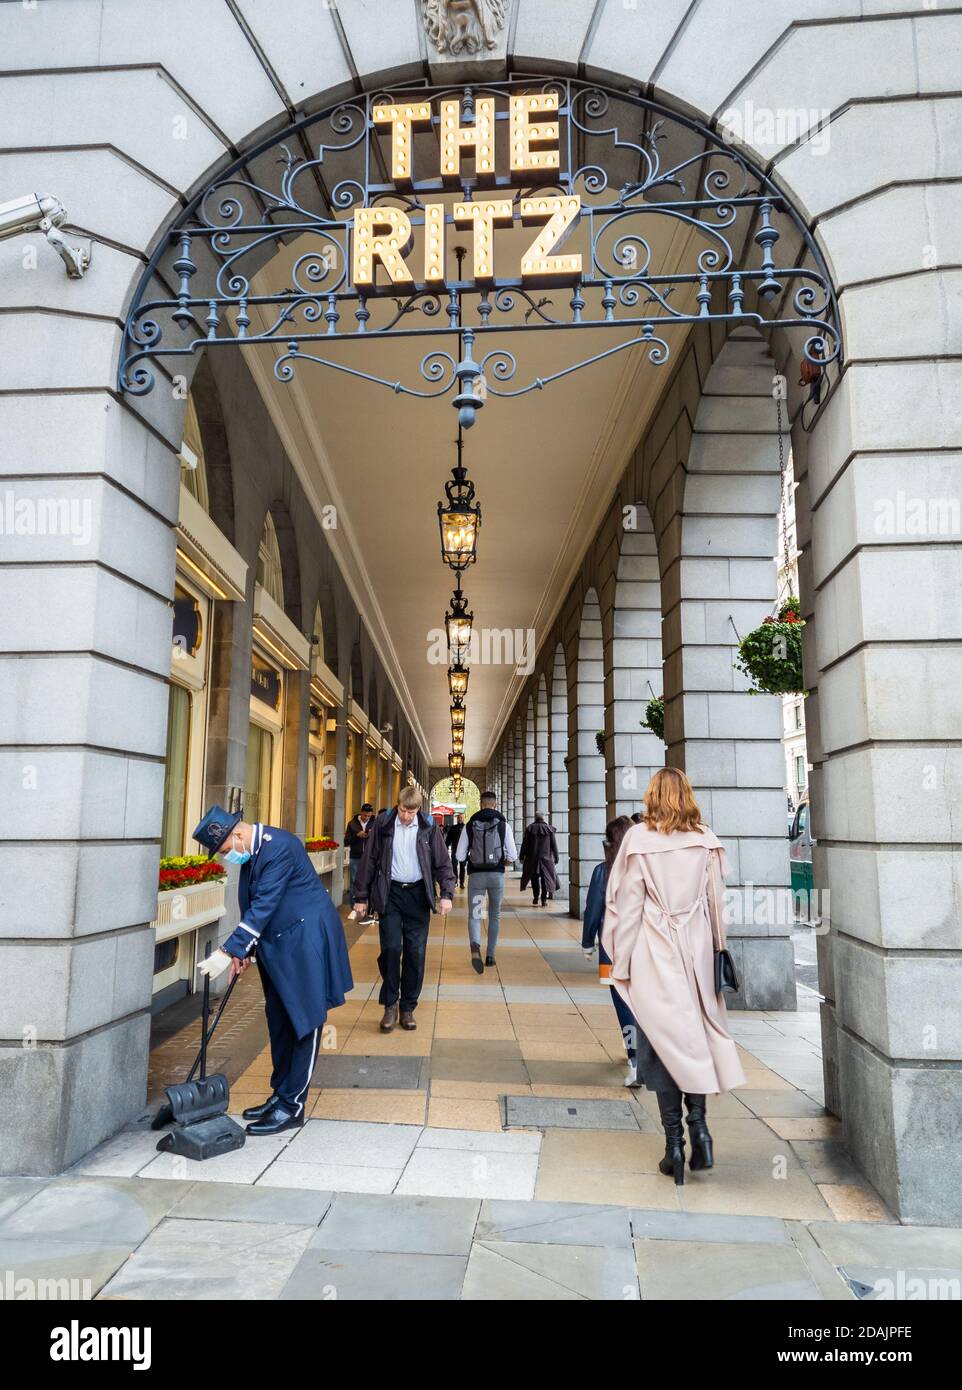 The Ritz. World famous hotel, restaurant and club. Stock Photo